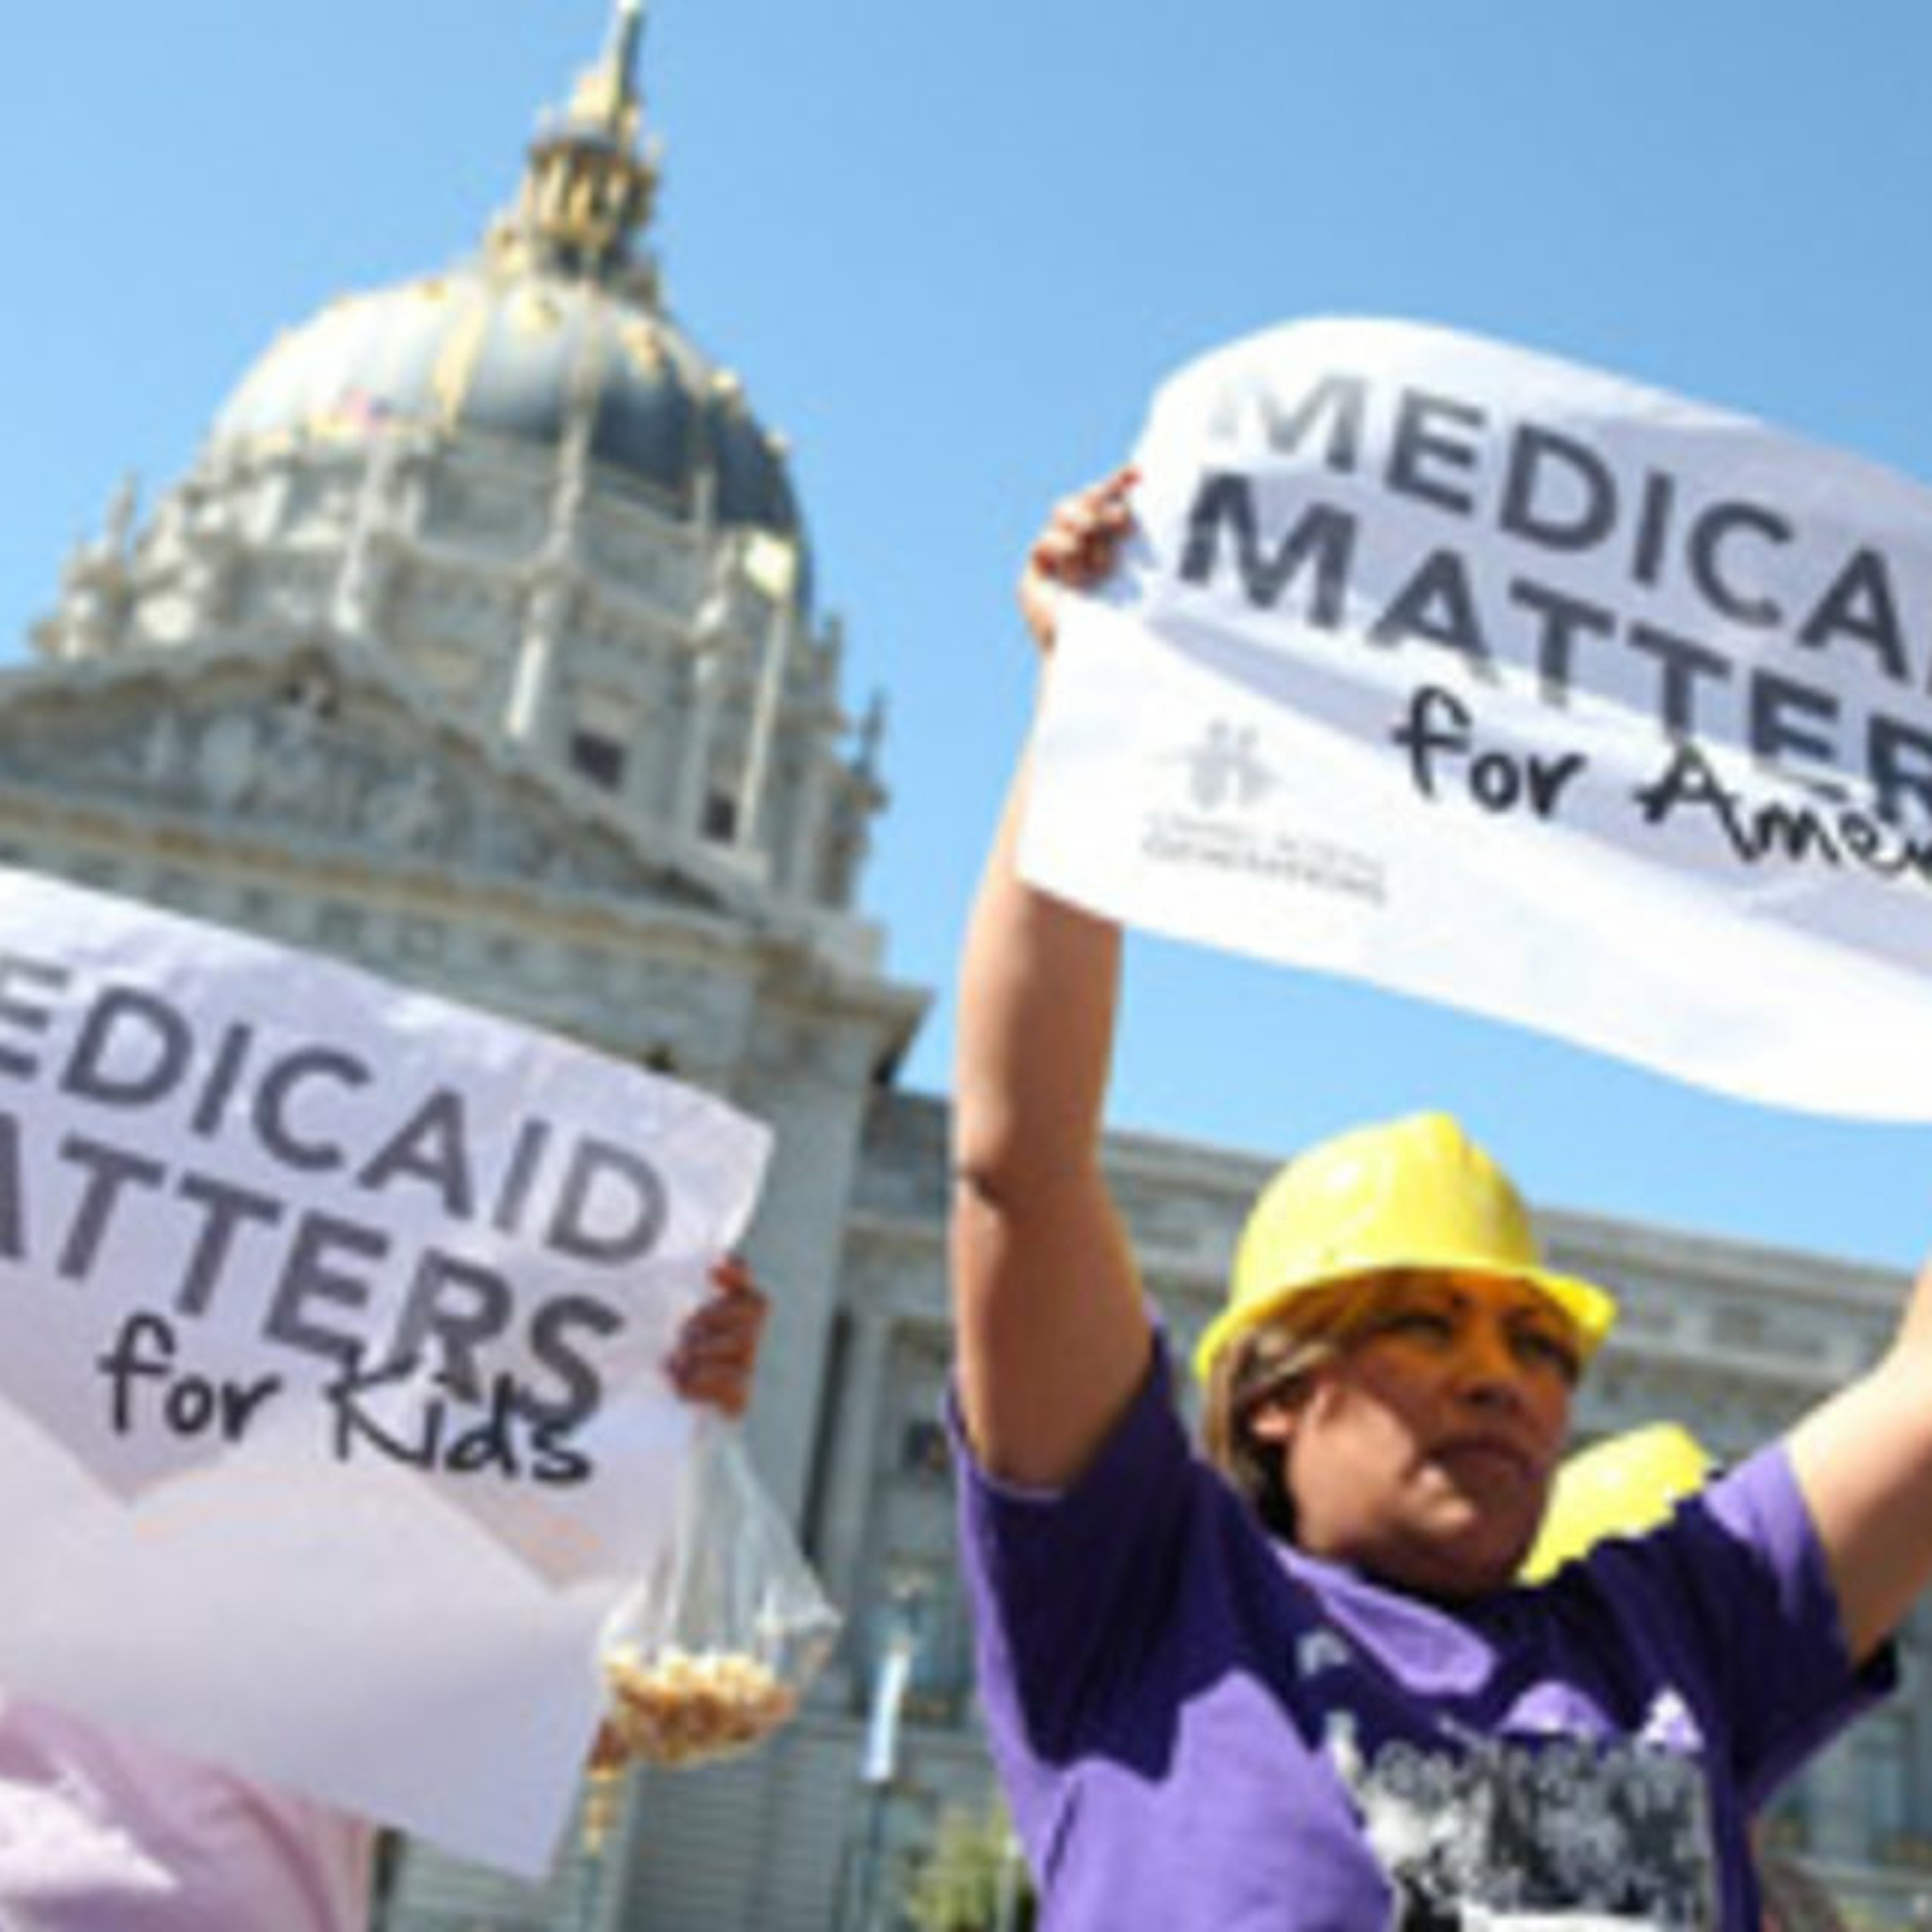 Is it a myth that Medicaid is broken?